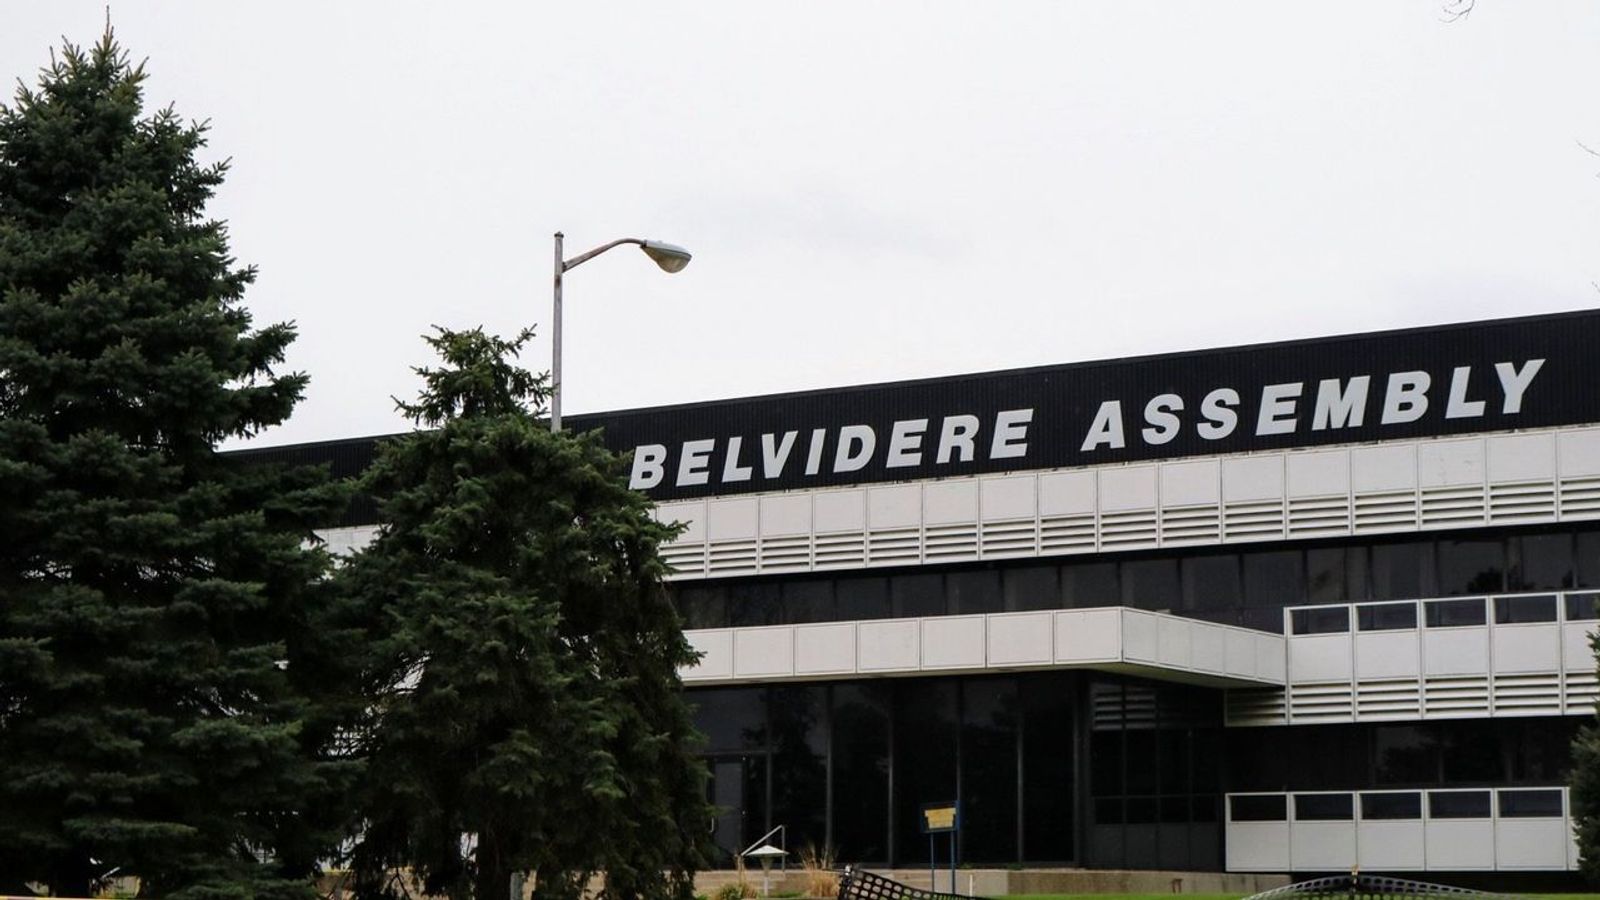 Stellantis announces indefinite layoffs for 1,350 Belvidere Assembly